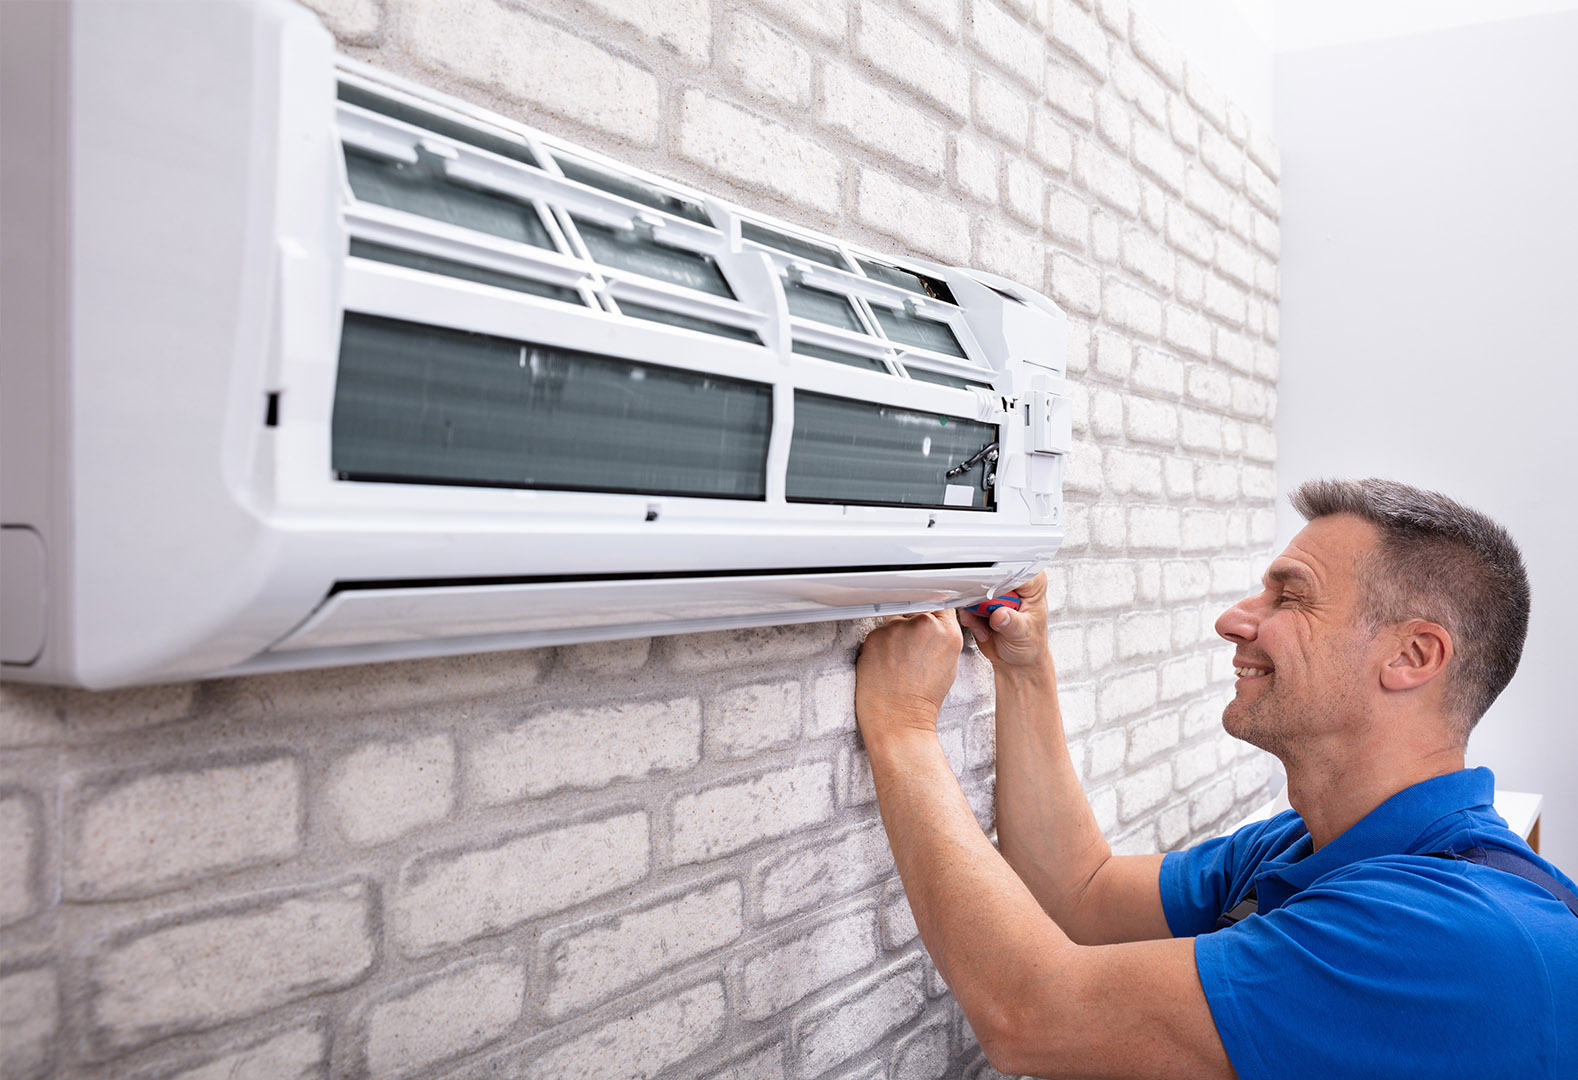 Experience the difference Ellis Refrigeration can make for your home or business.